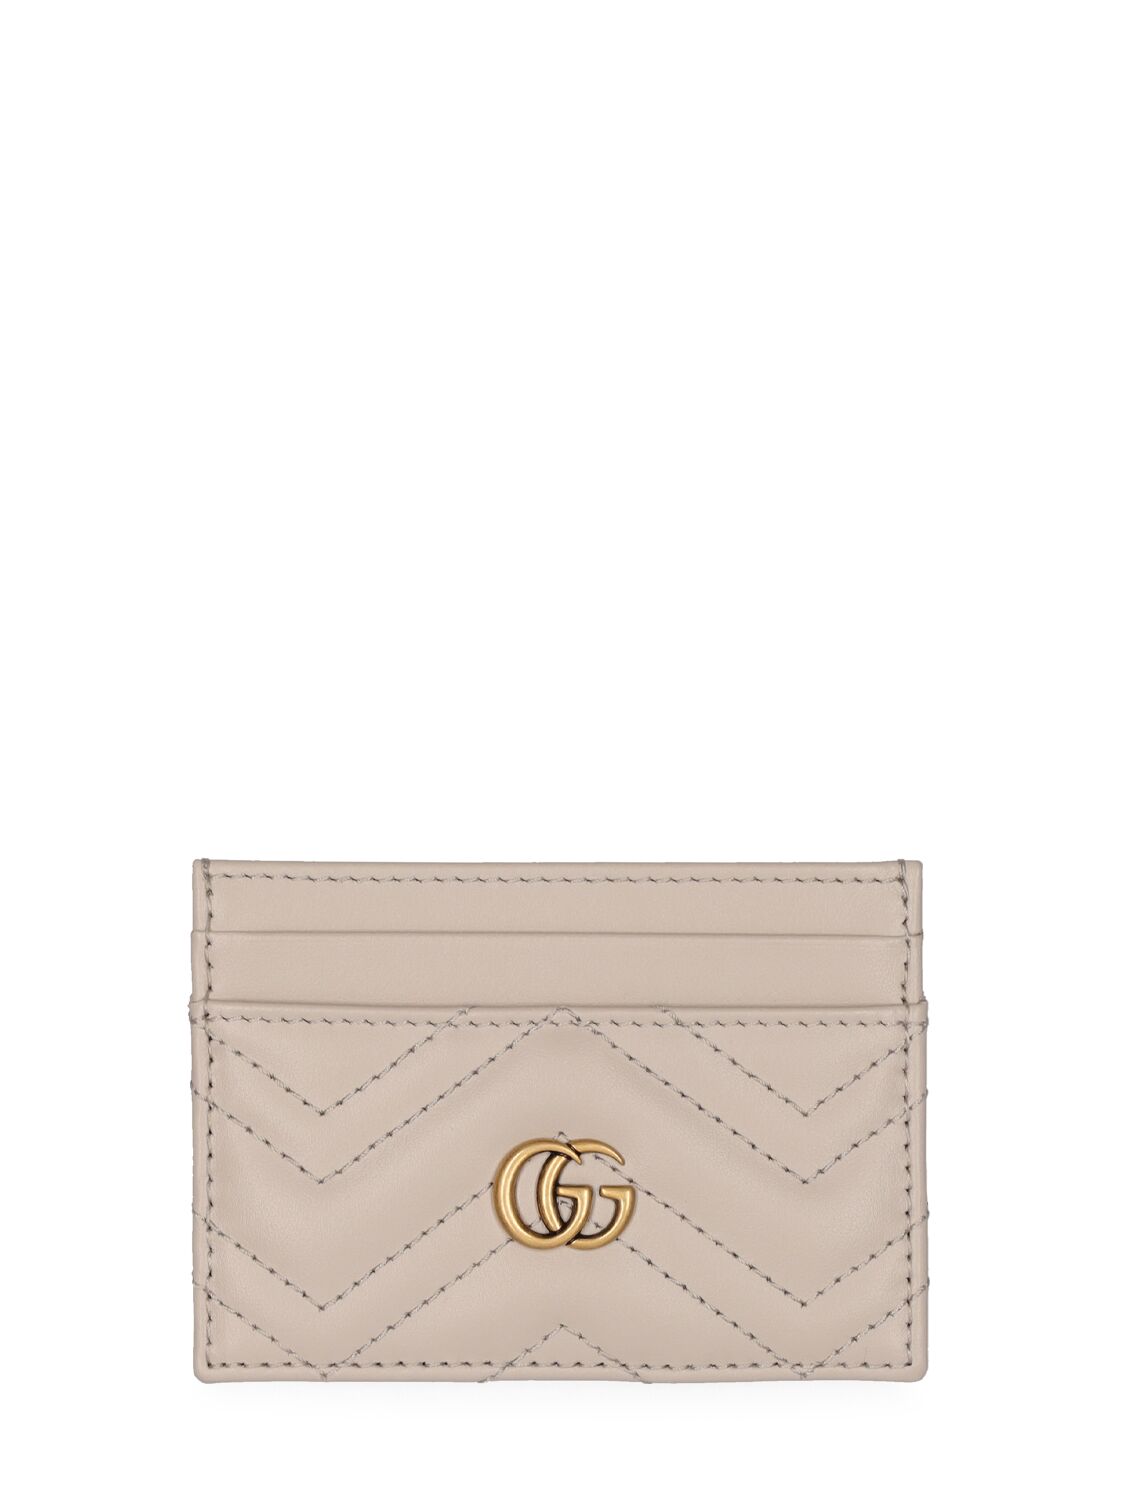 Gucci Gg Marmont Leather Card Case In White